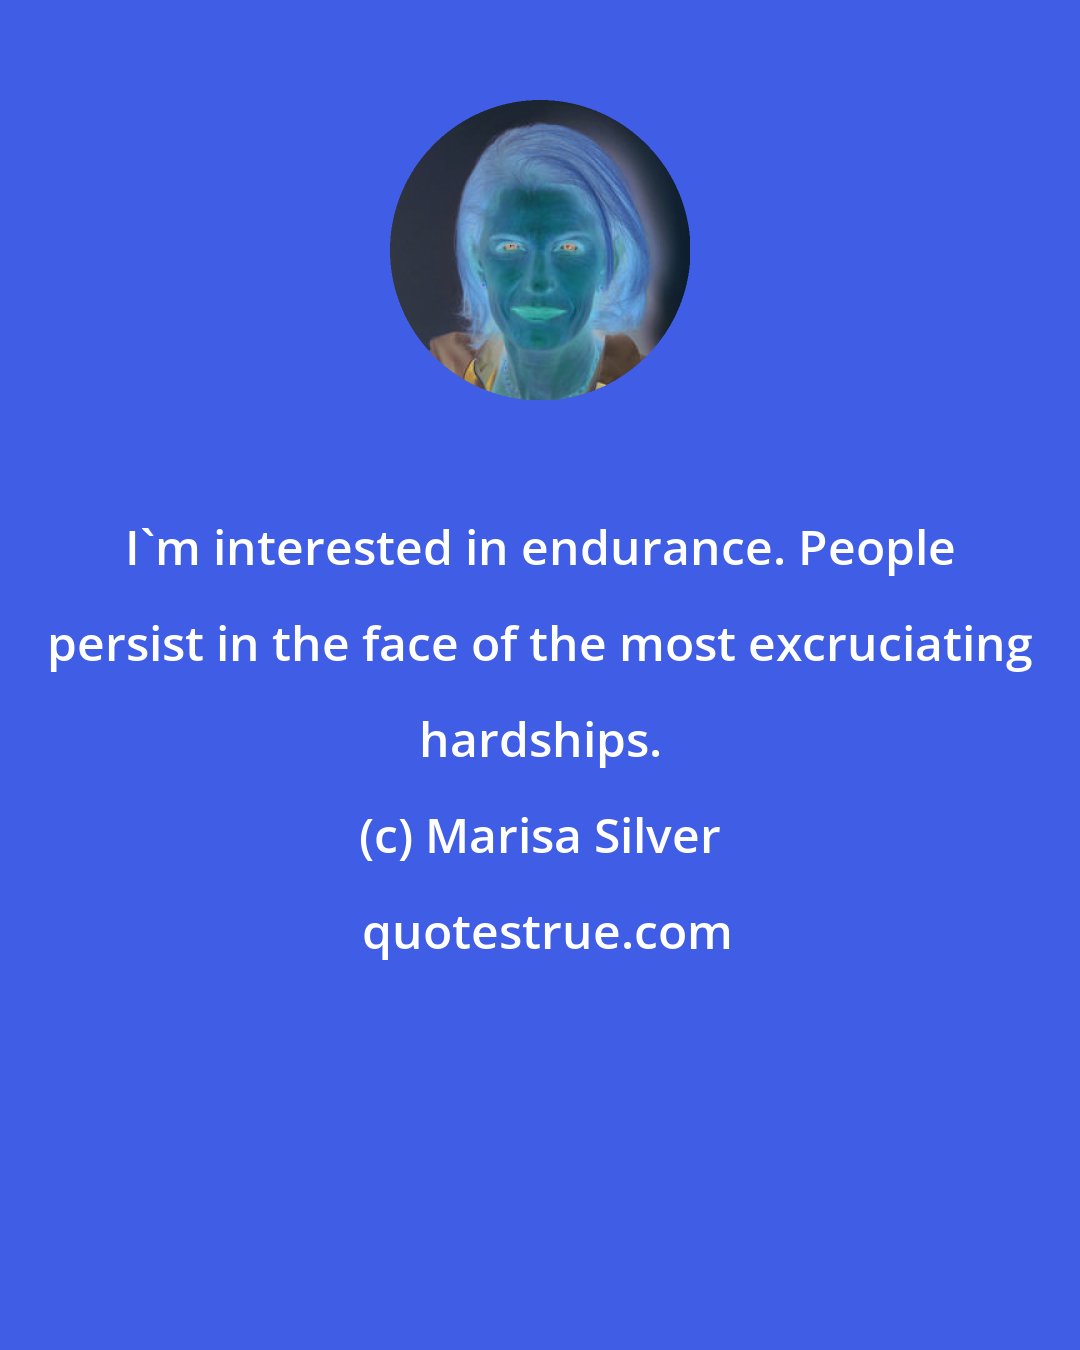 Marisa Silver: I'm interested in endurance. People persist in the face of the most excruciating hardships.